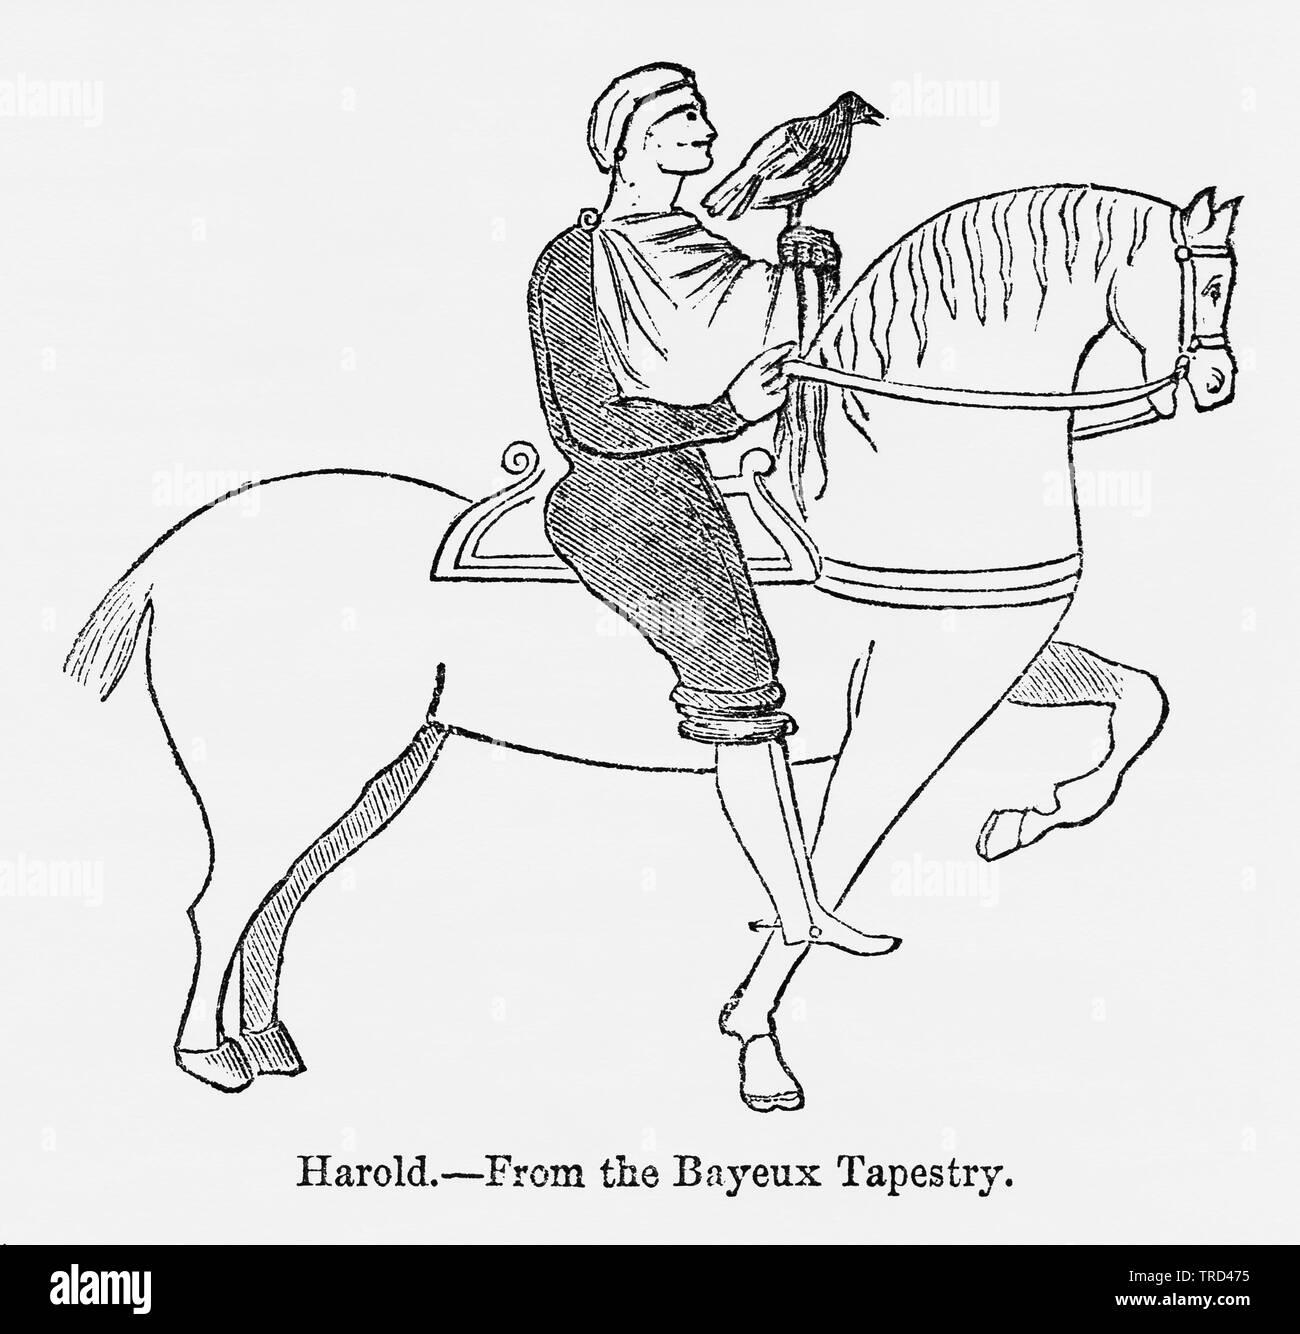 Harold, from the Bayeux Tapestry, Harold II Riding on Horse with Hawk Perched on his Hand, Illustration from John Cassell's Illustrated History of England, Vol. I from the earliest period to the reign of Edward the Fourth, Cassell, Petter and Galpin, 1857 Stock Photo